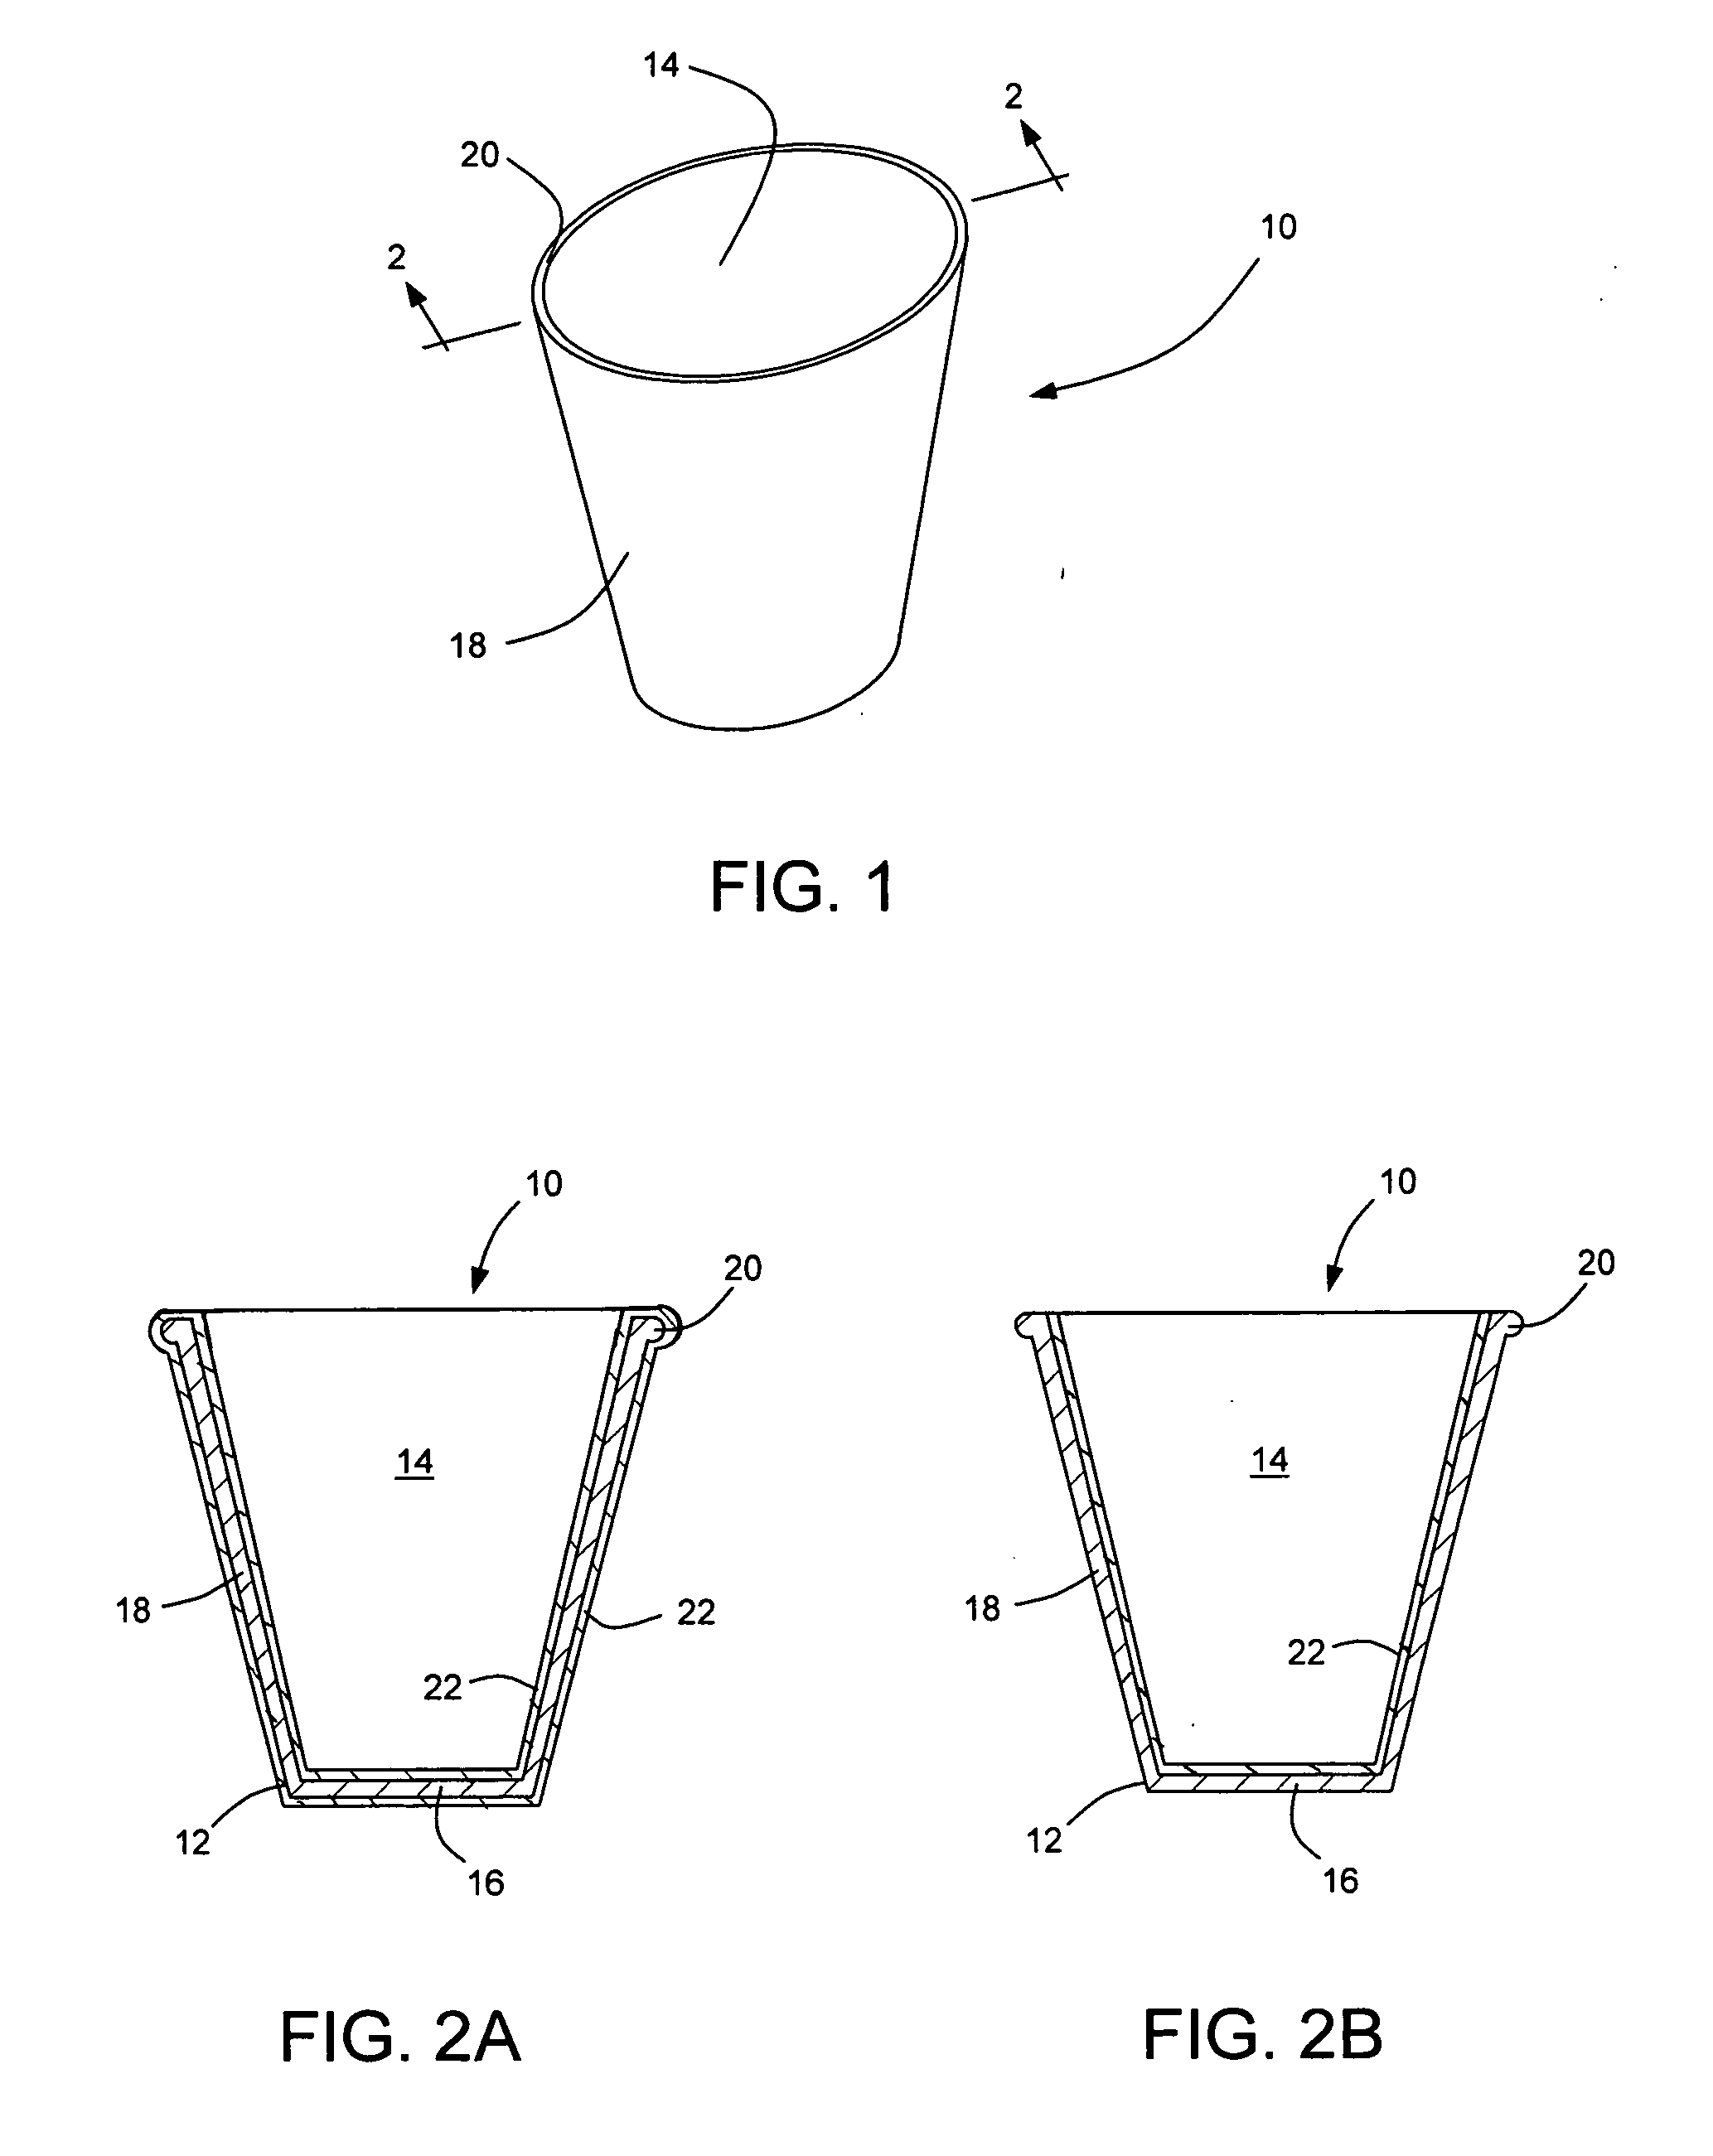 Biodegradable compositions, articles prepared from biodegradable compositions and manufacturing methods